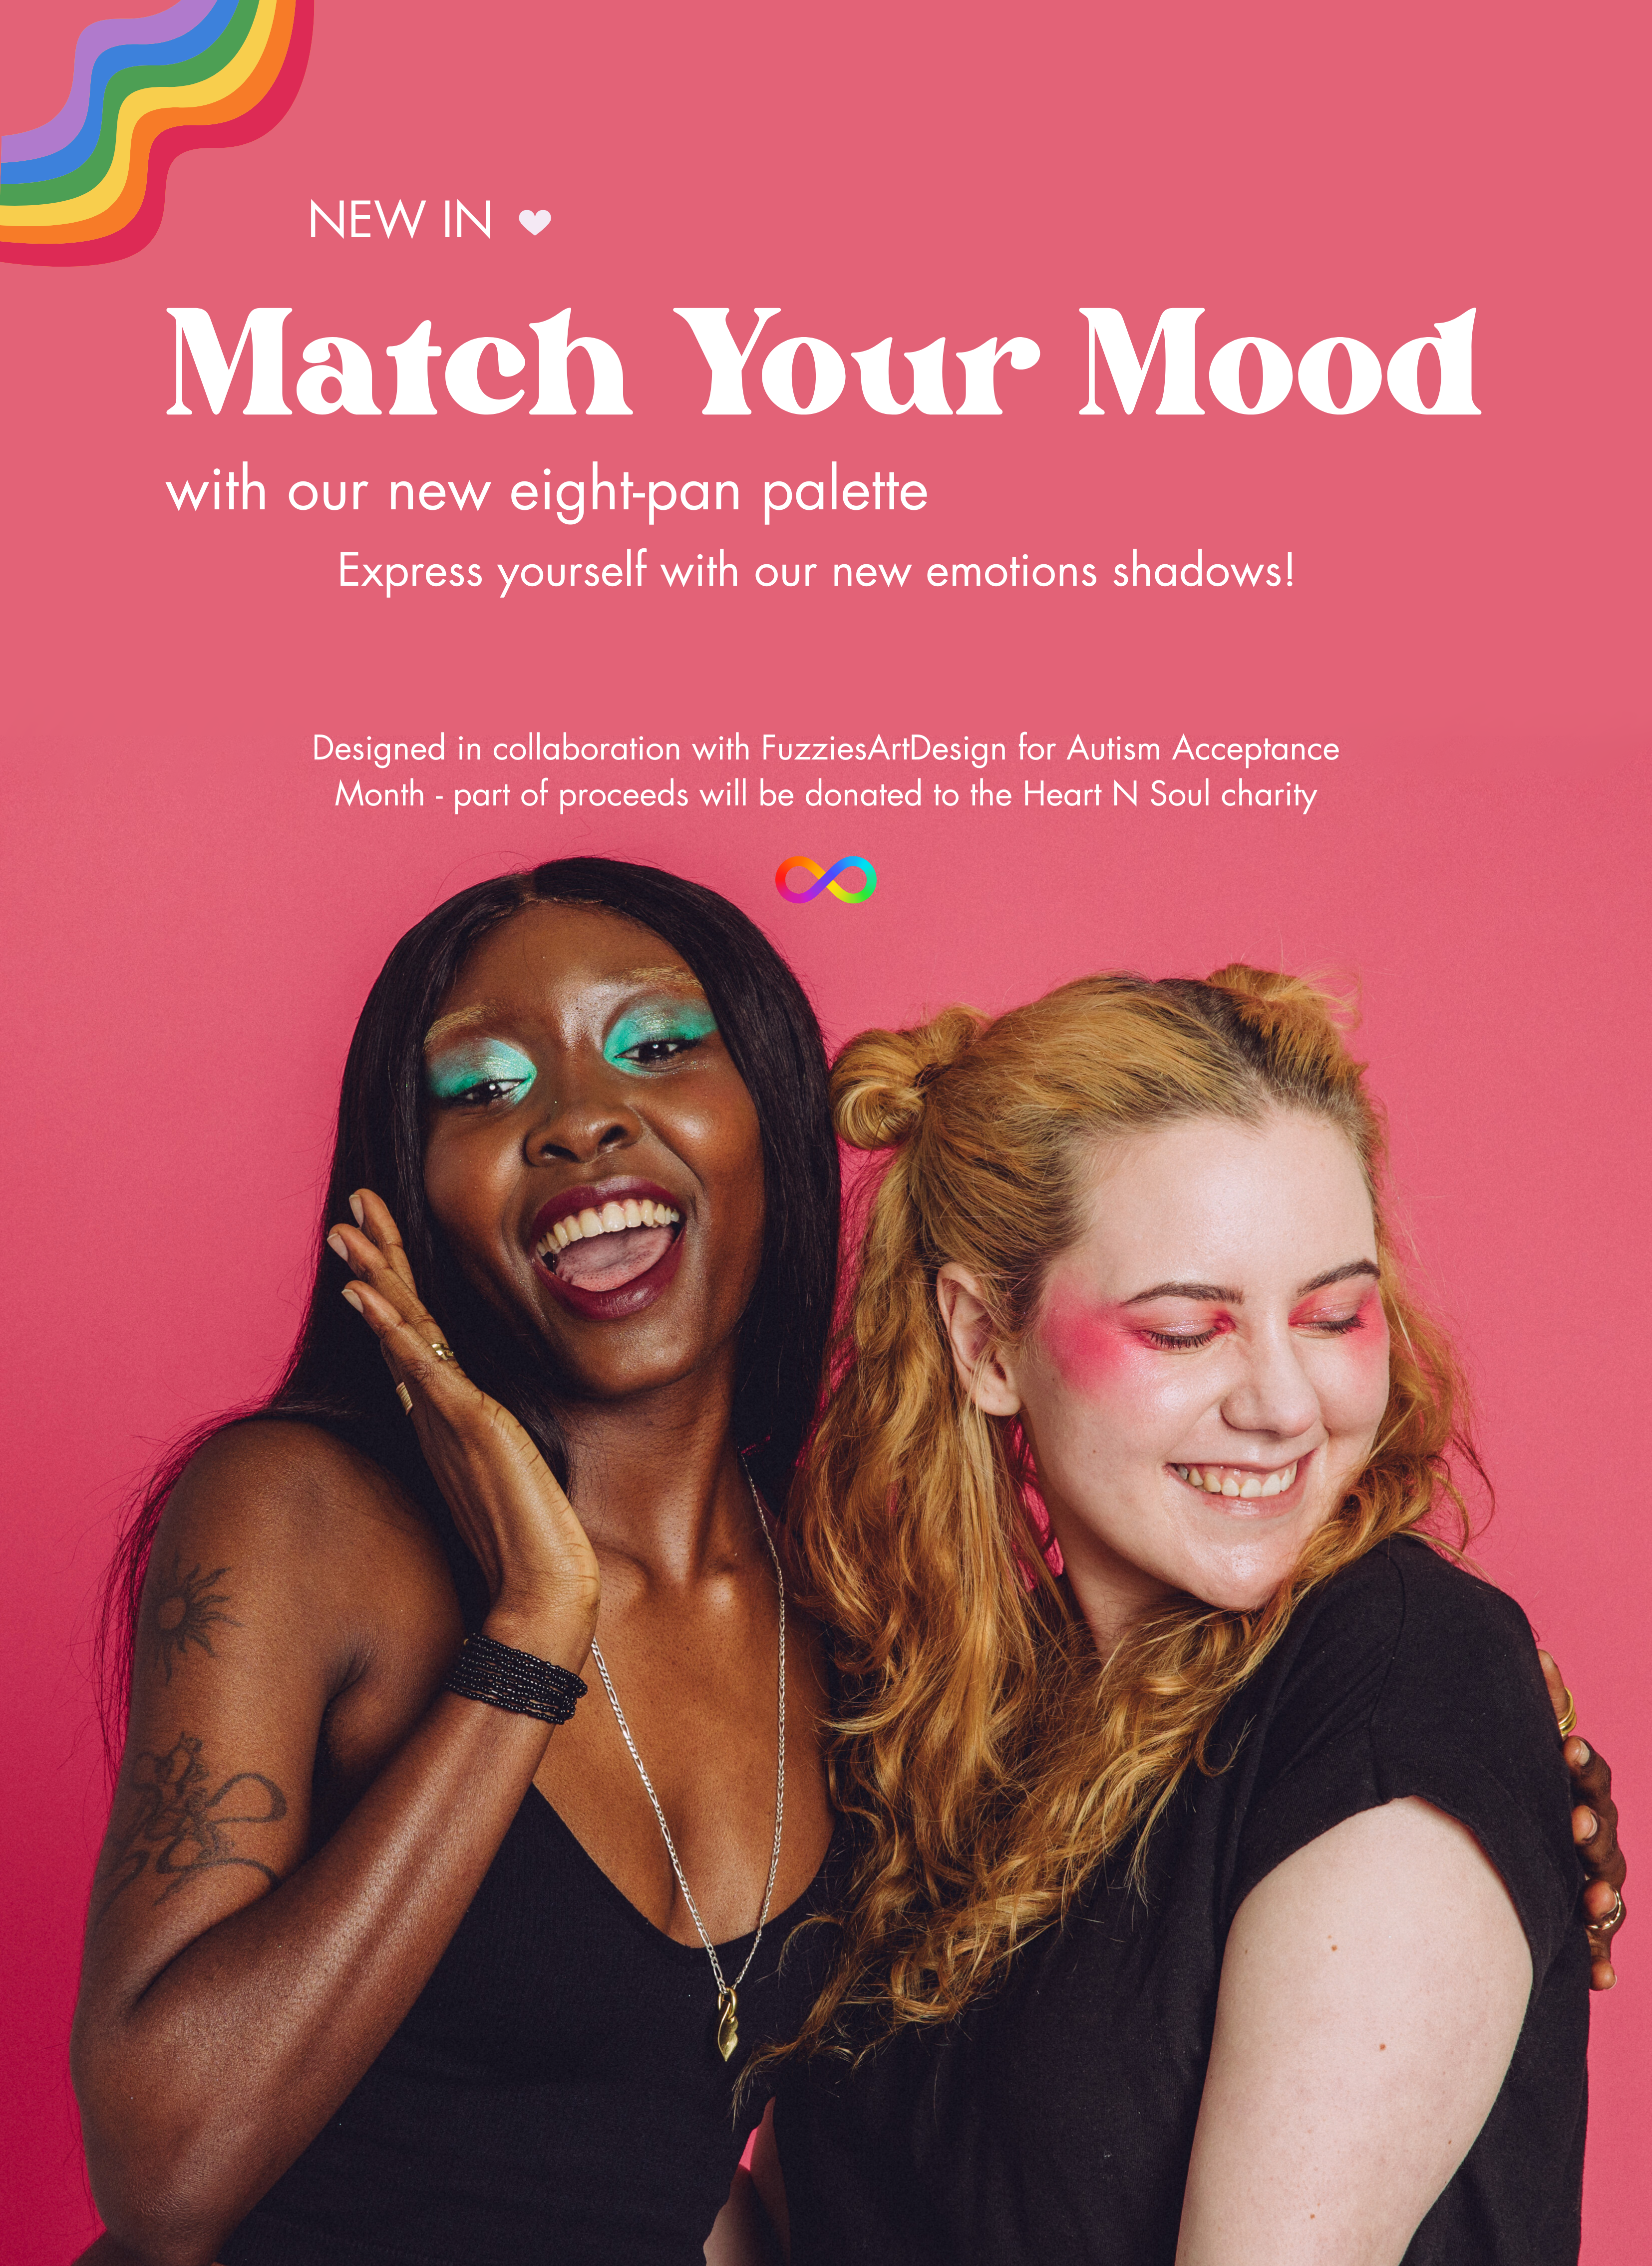 A picture of two people wearing colourful makeup and mimicking being happy and silly - next to them is a text that reads Match Your Mood with our new eight-pan palette. Express yourself with our new emotions shadows! designed with FuzziesArtDesign for Autism Acceptance Month, part of proceeds will be donated to the Heart N Soul charity.